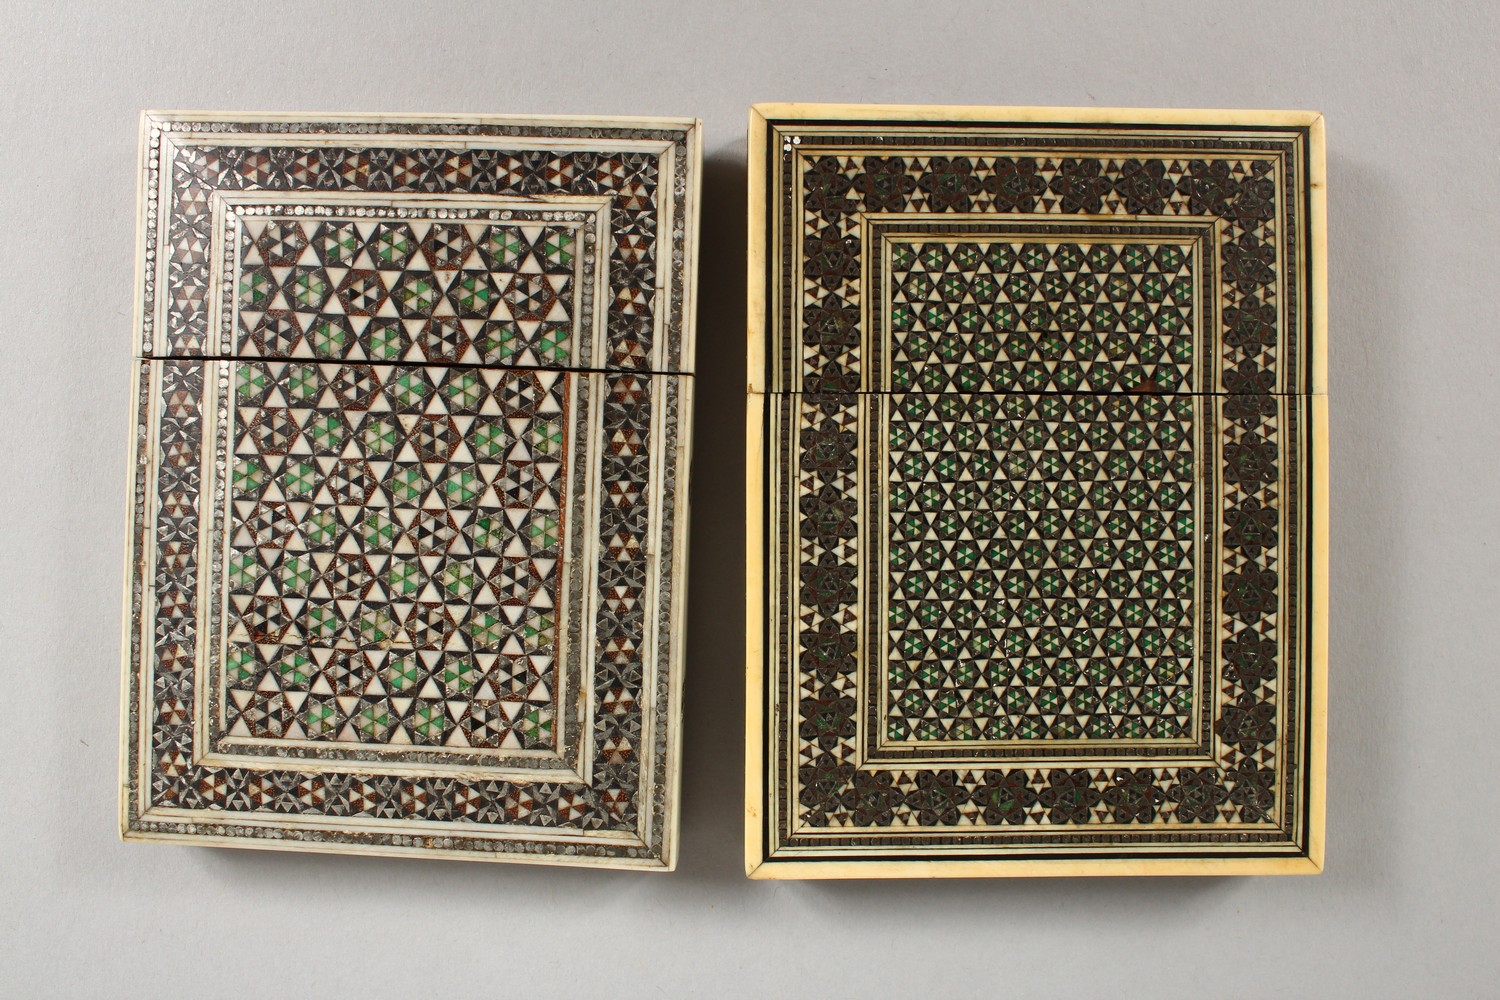 TWO 19TH CENTURY INLAID BONE CALLING CARD CASES. 4ins x 3ins. - Image 2 of 4